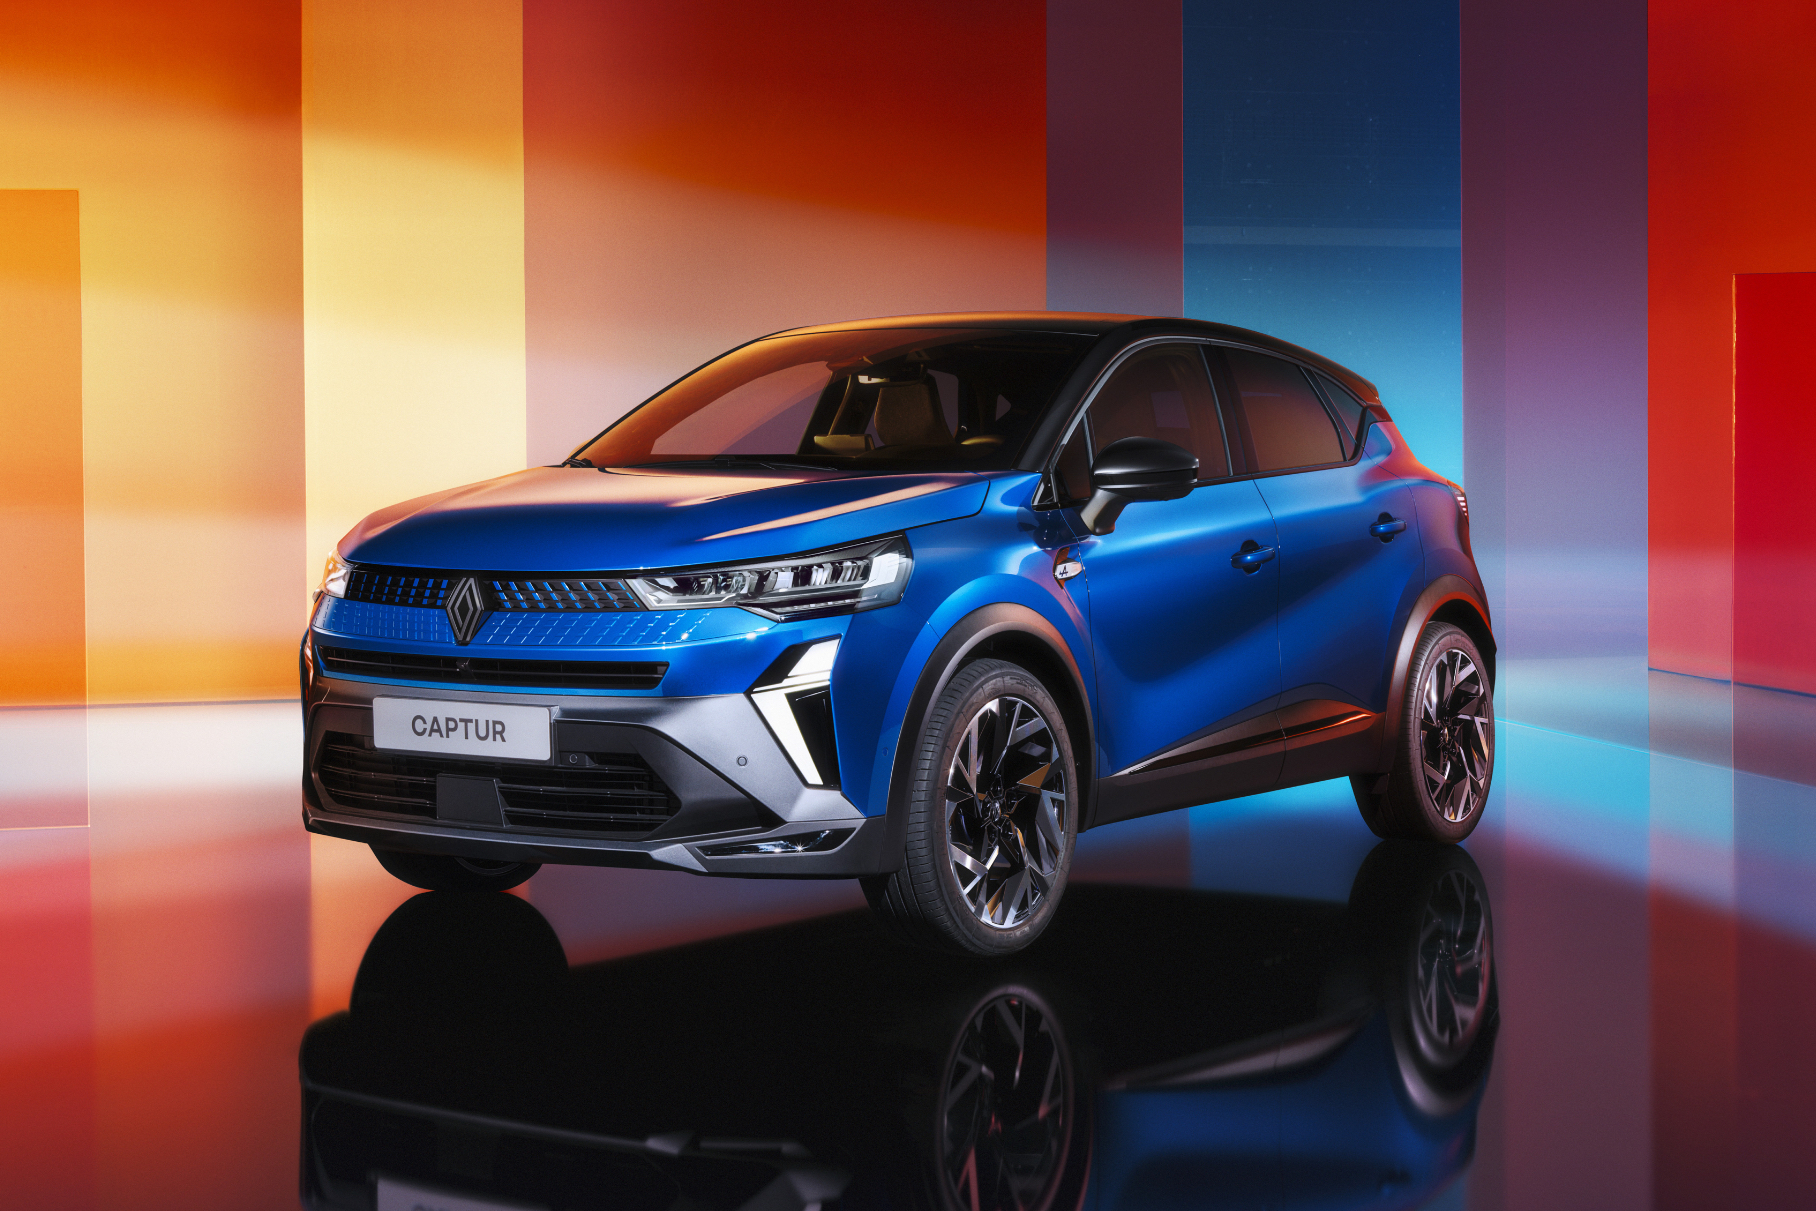 Renault Captur updated: what has changed - Motor